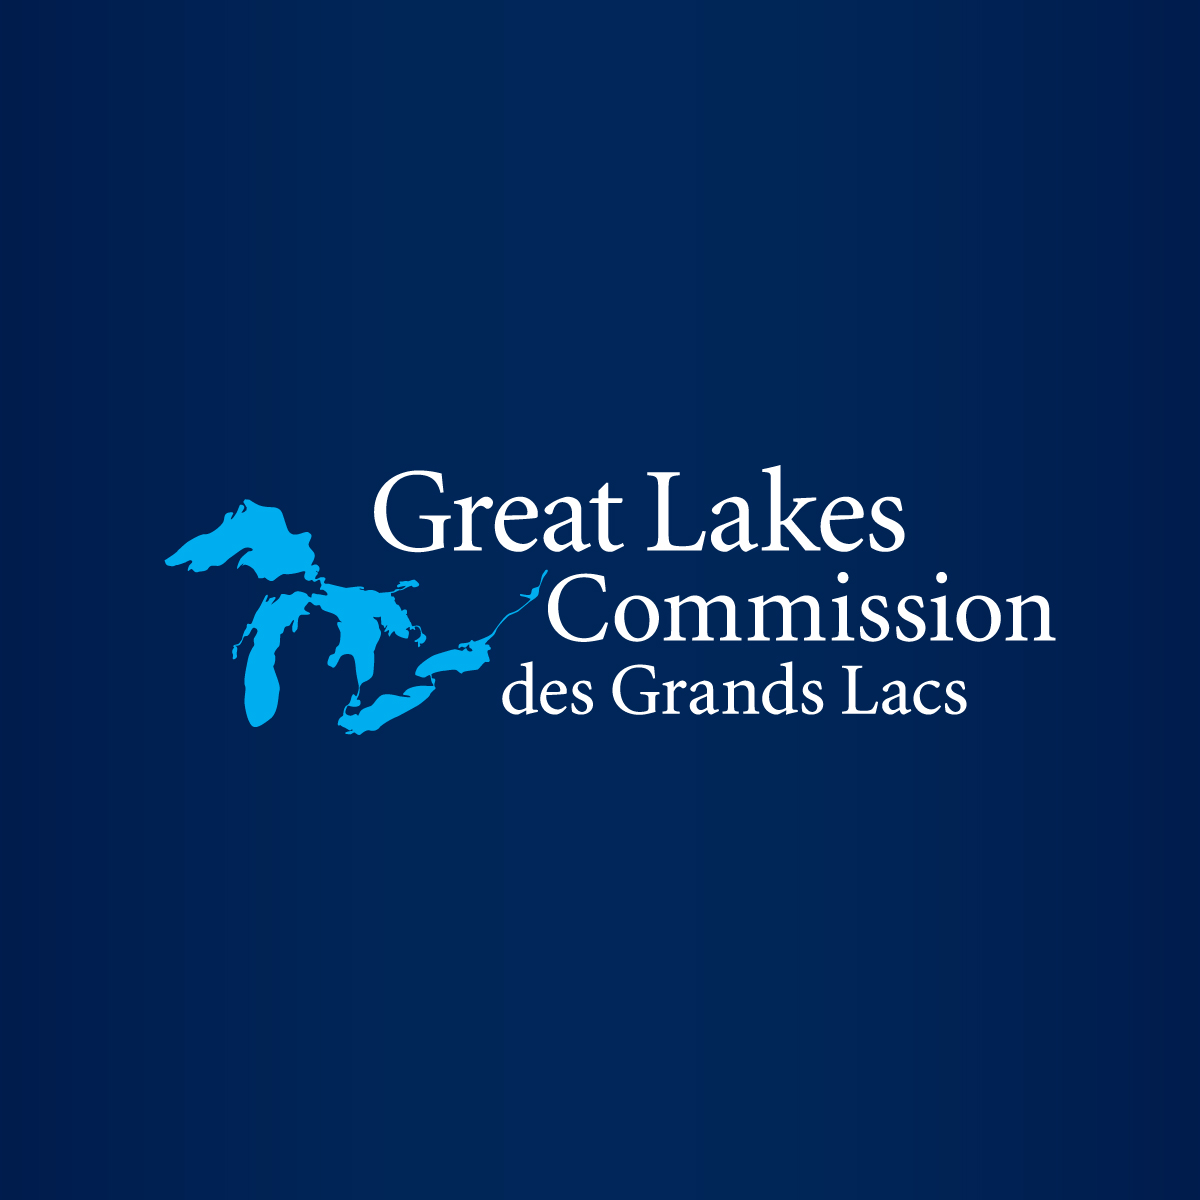 Great Lakes water levels lower than last year